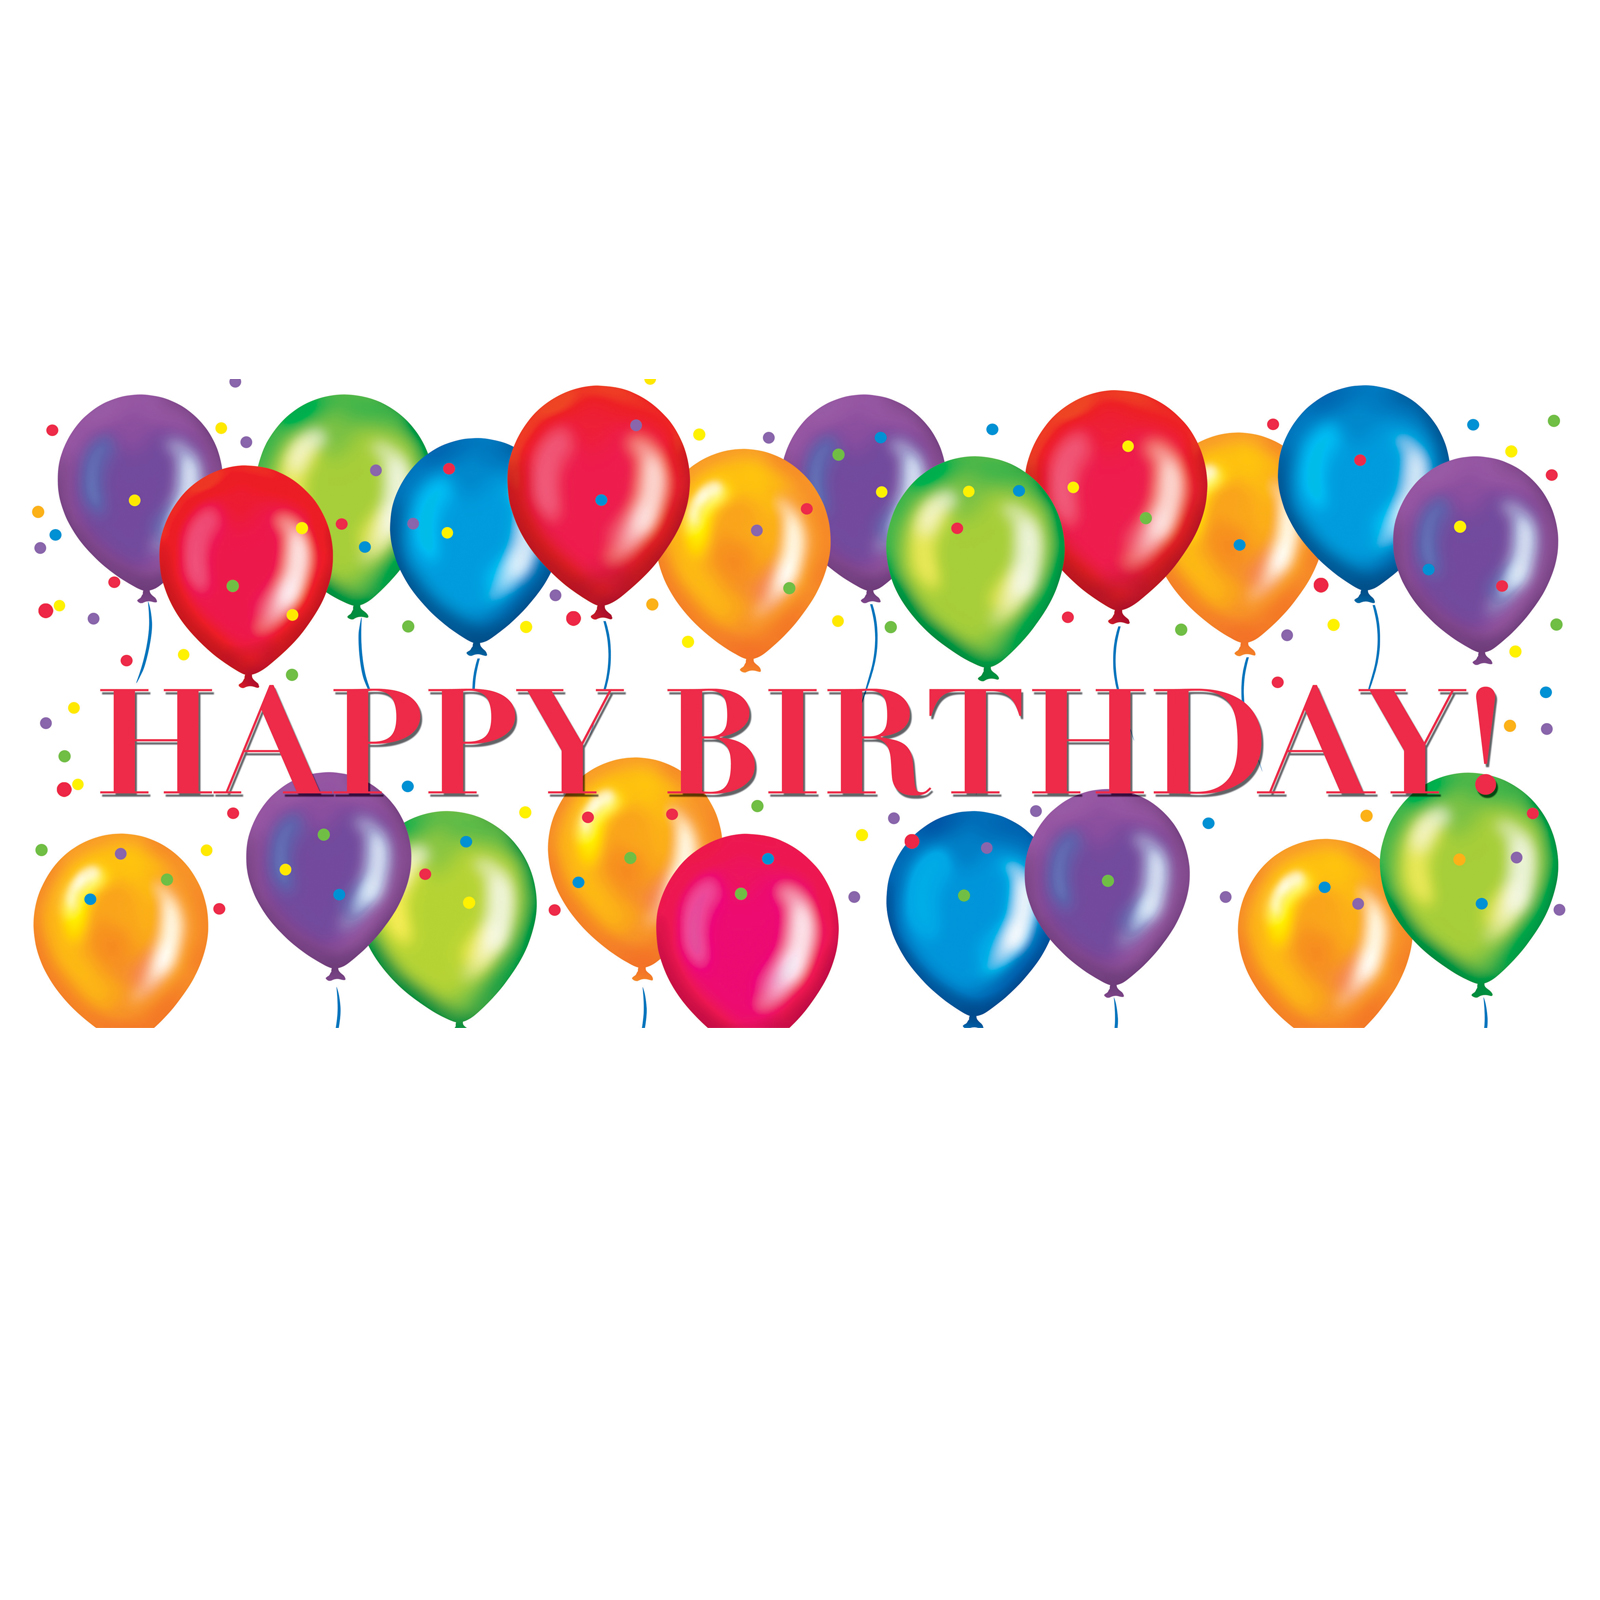 birthday clipart for email - photo #6